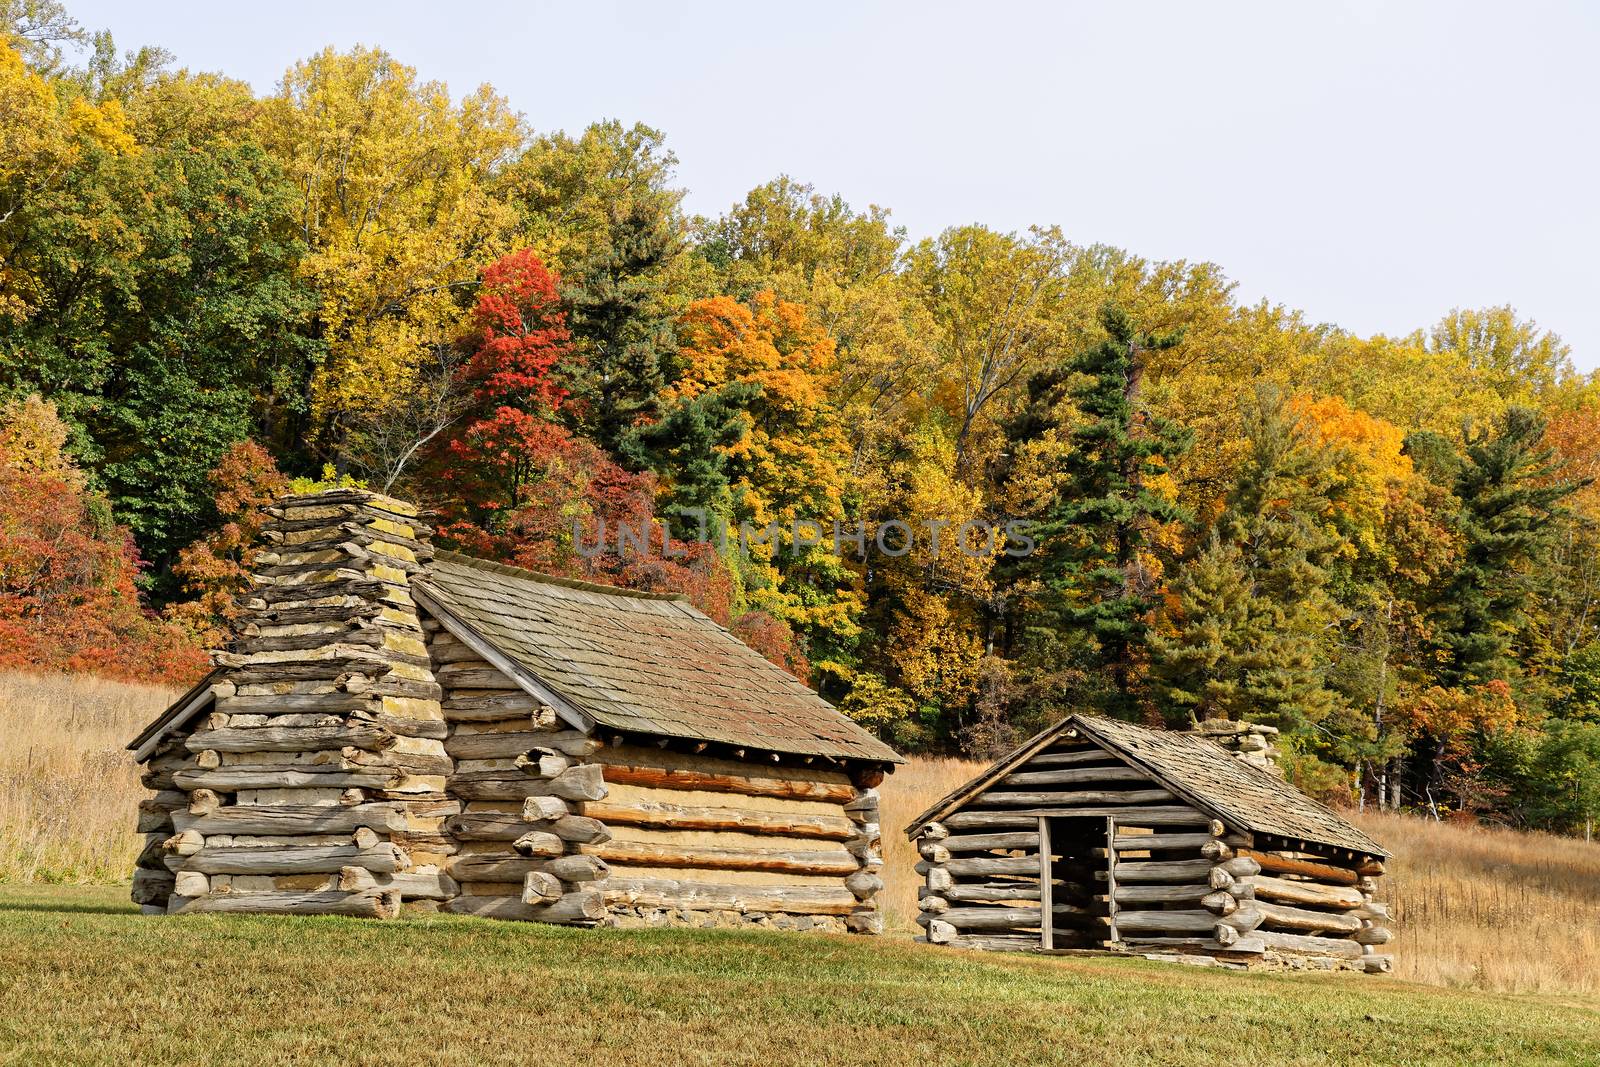 Cabins at Valley Forge by DelmasLehman